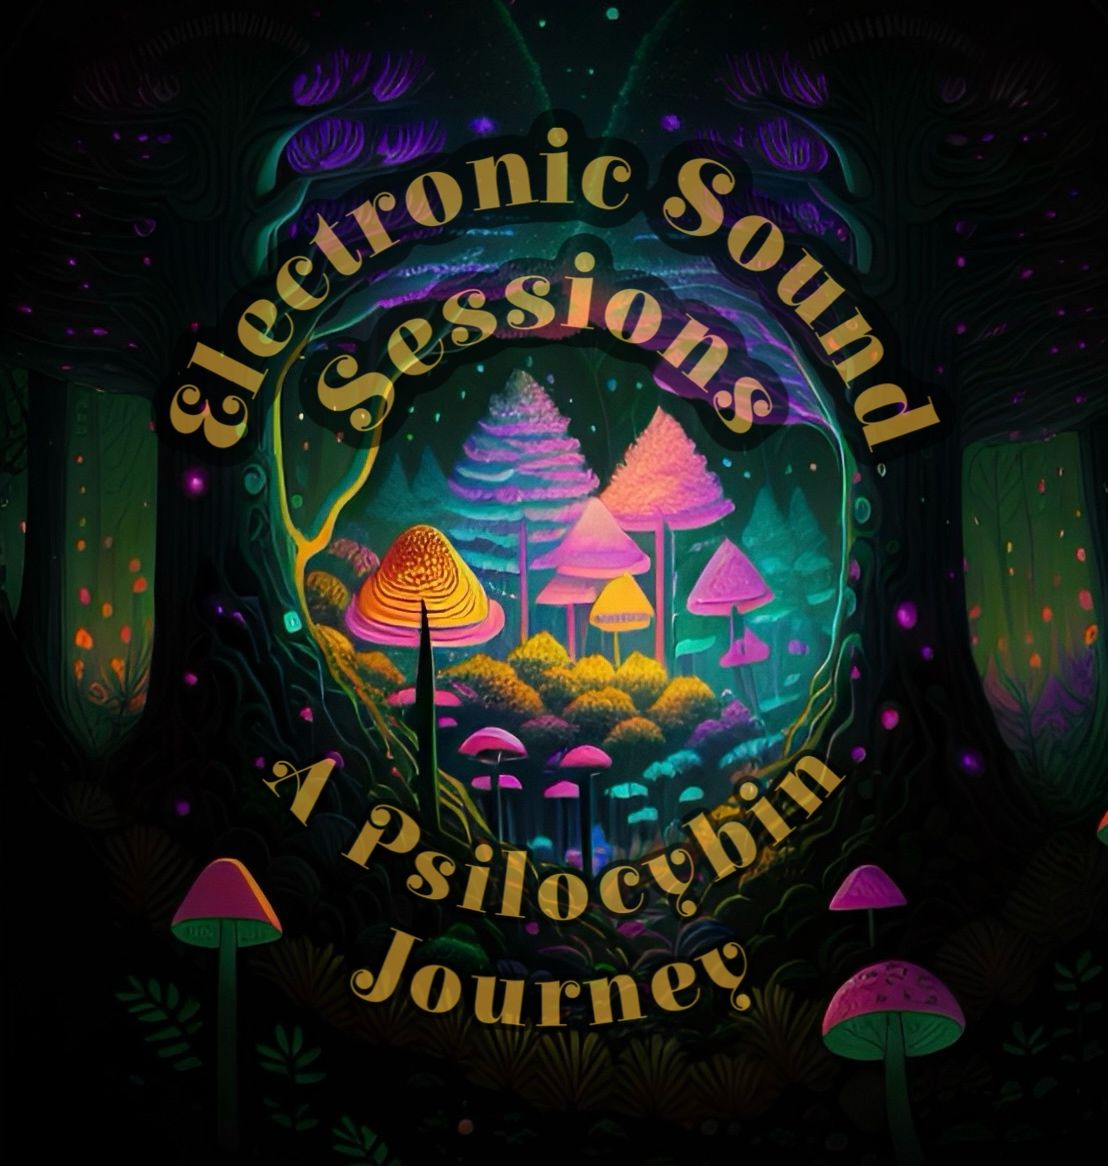 Electronic Sound Sessions